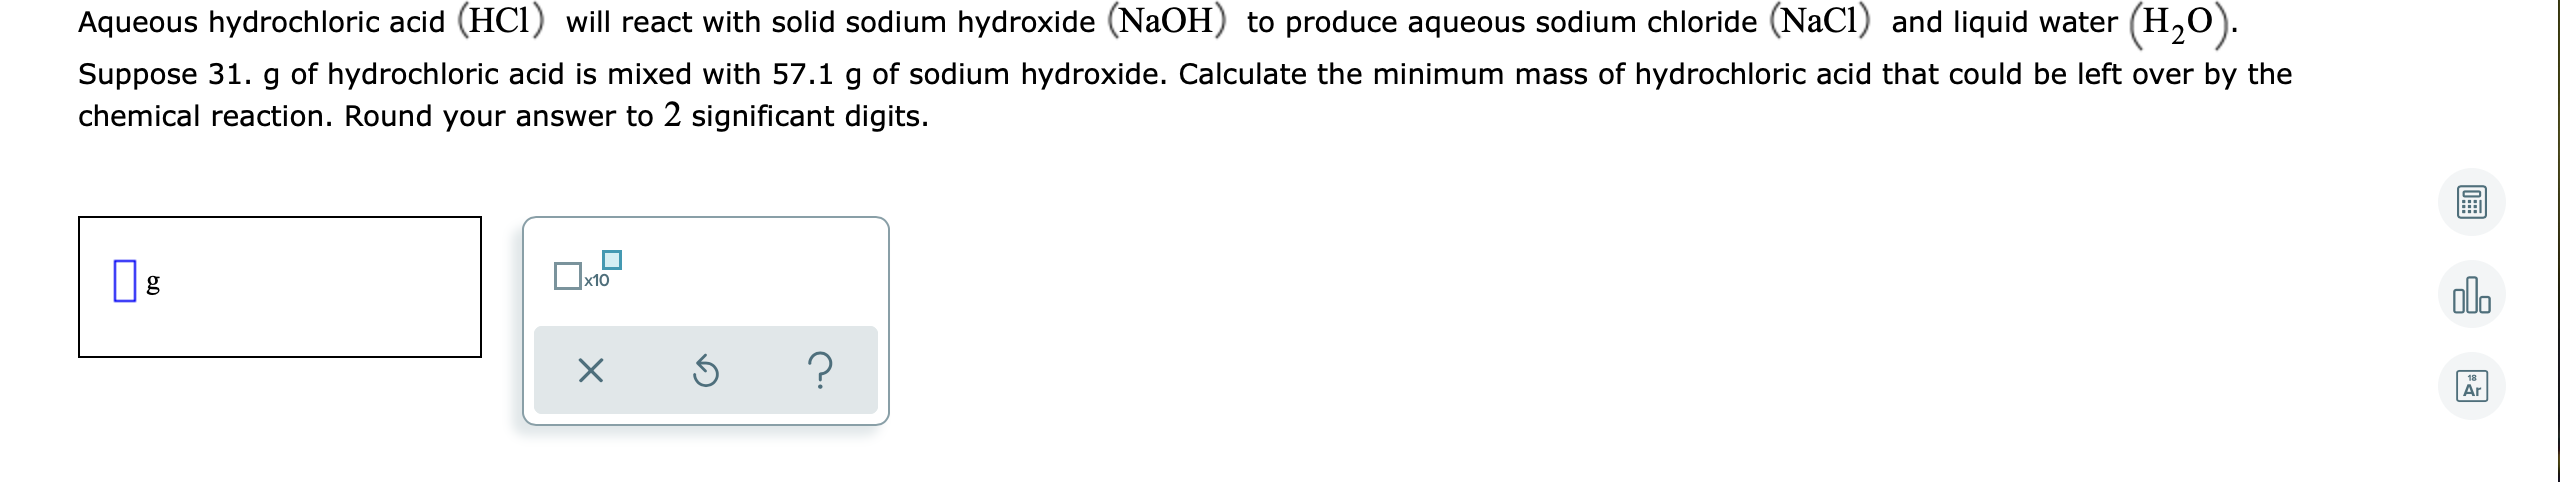 Aqueous hydrochloric acid (HCl) will react with solid sodium hydroxide (NaOH) to produce aqueous sodium chloride (NaCI) and liquid water (H,O).
Suppose 31. g of hydrochloric acid is mixed with 57.1 g of sodium hydroxide. Calculate the minimum mass of hydrochloric acid that could be left over by the
chemical reaction. Round your answer to 2 significant digits.
